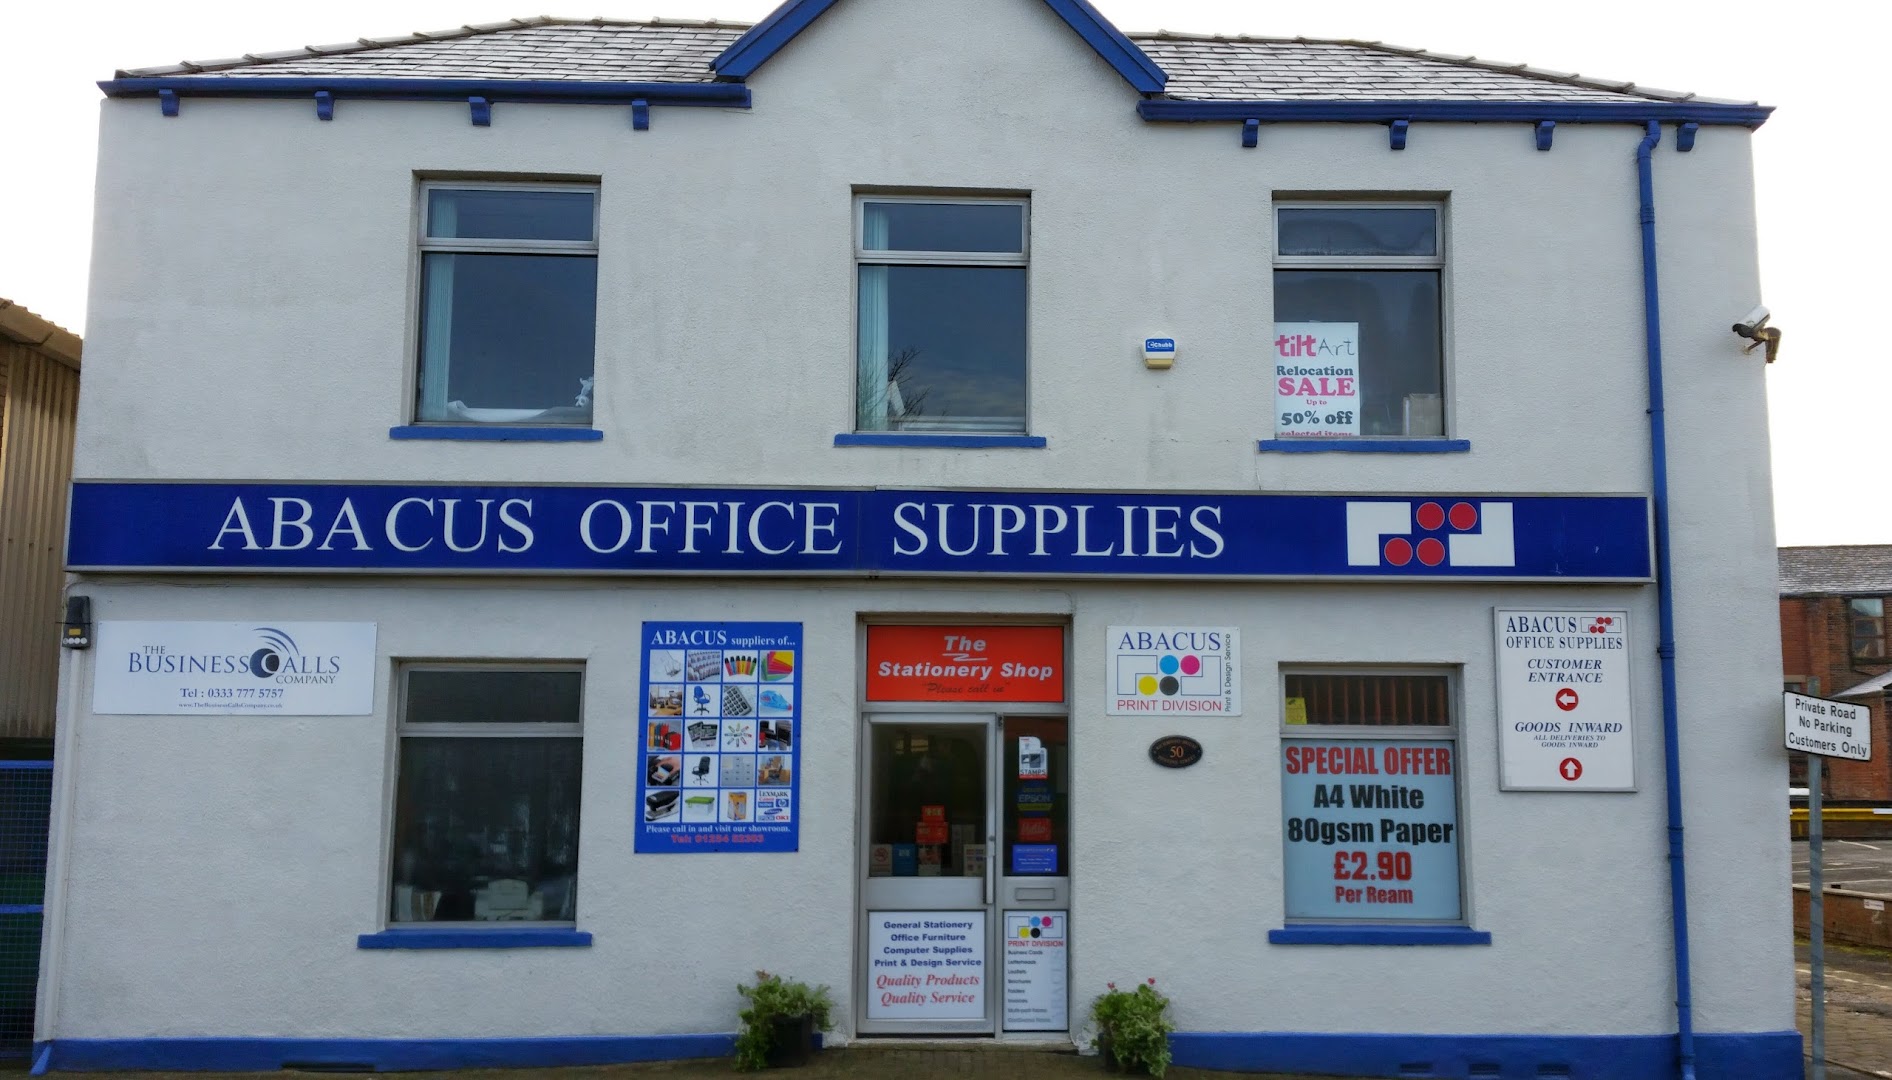 Abacus Office Supplies Ltd